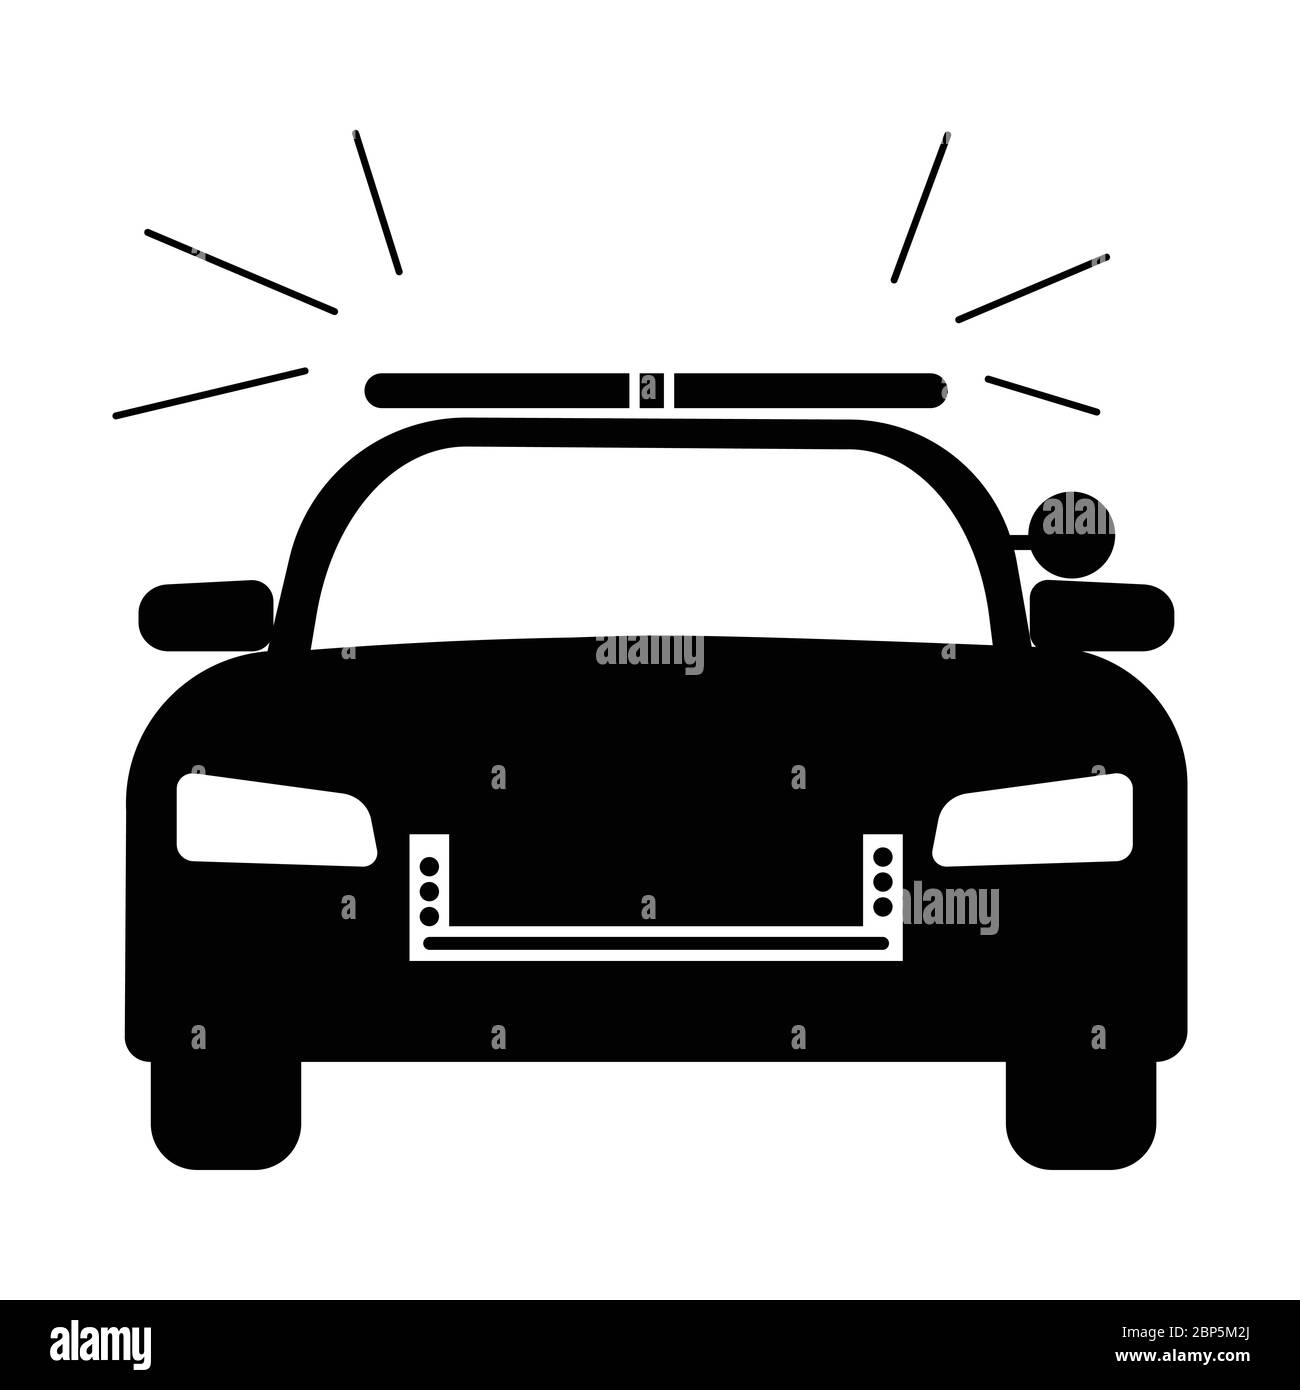 https://c8.alamy.com/comp/2BP5M2J/police-cop-car-with-siren-front-view-simple-black-and-white-illustration-depicting-police-emergency-response-vehicle-car-with-flash-eps-vector-2BP5M2J.jpg